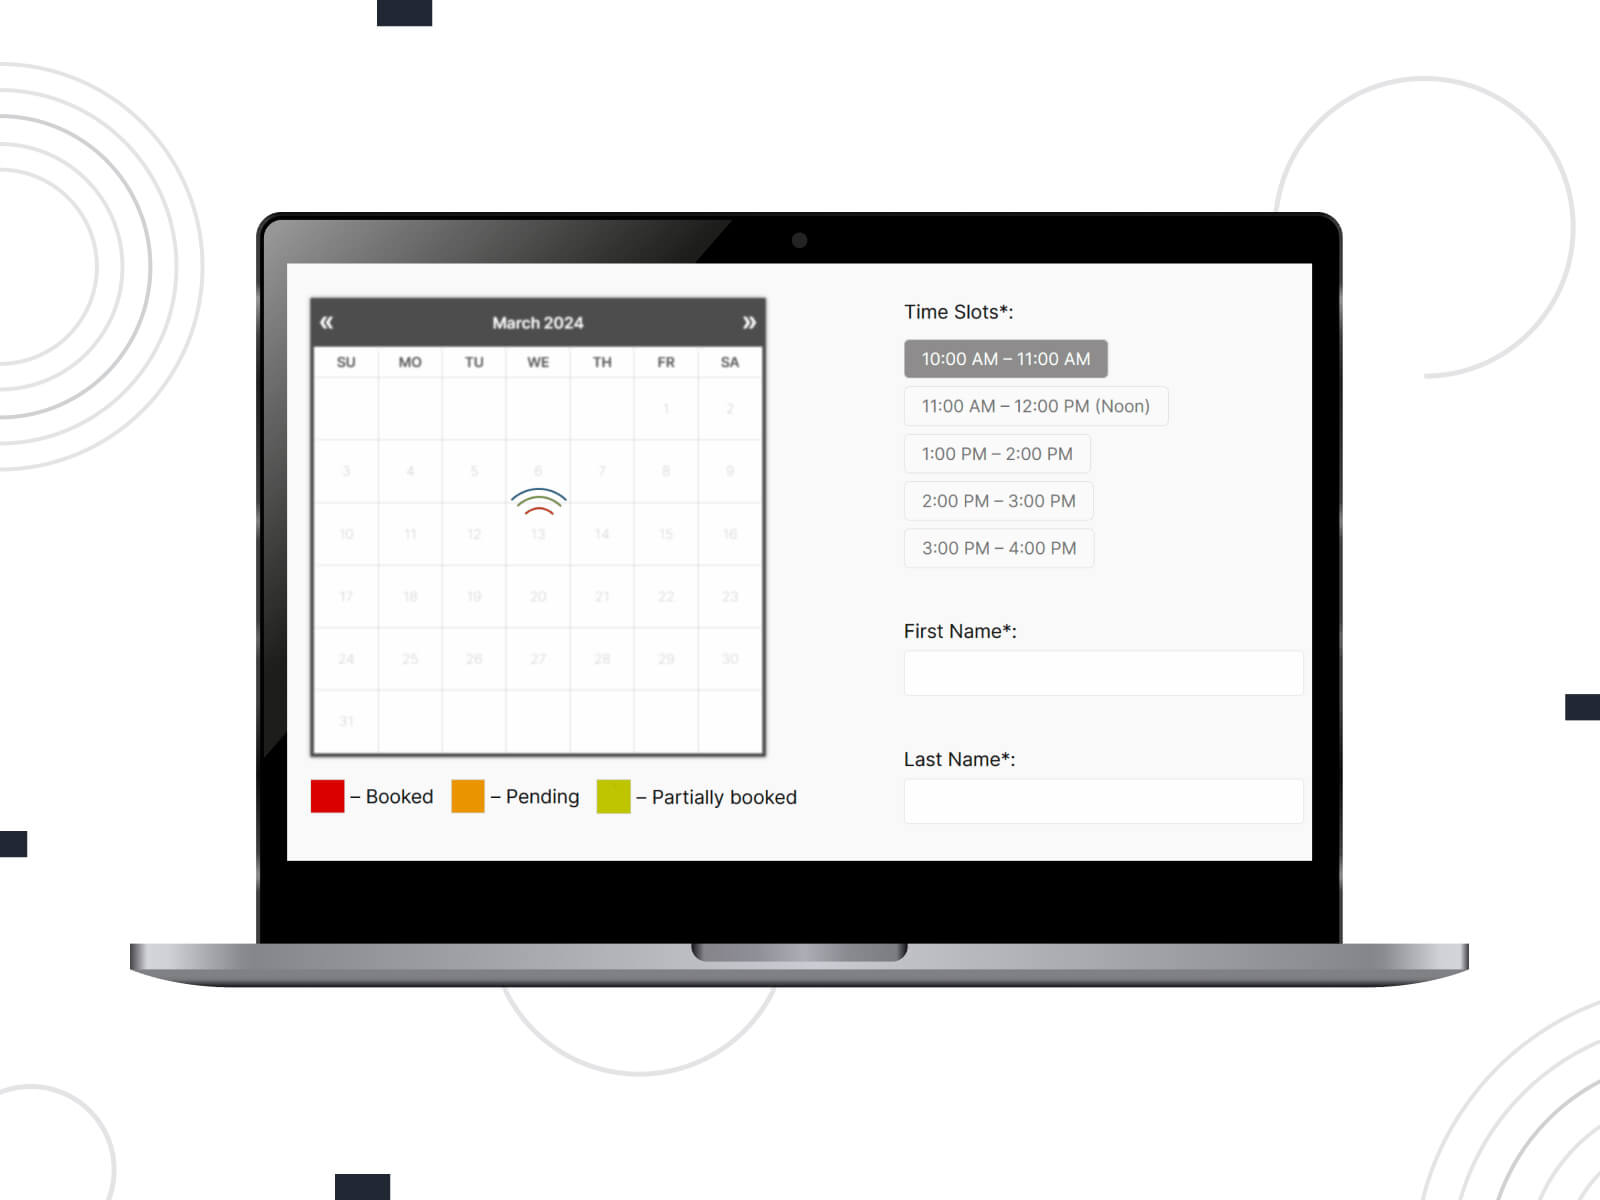 WP Booking Calendar - one of the best WordPress calendar plugins for appointment scheduling.